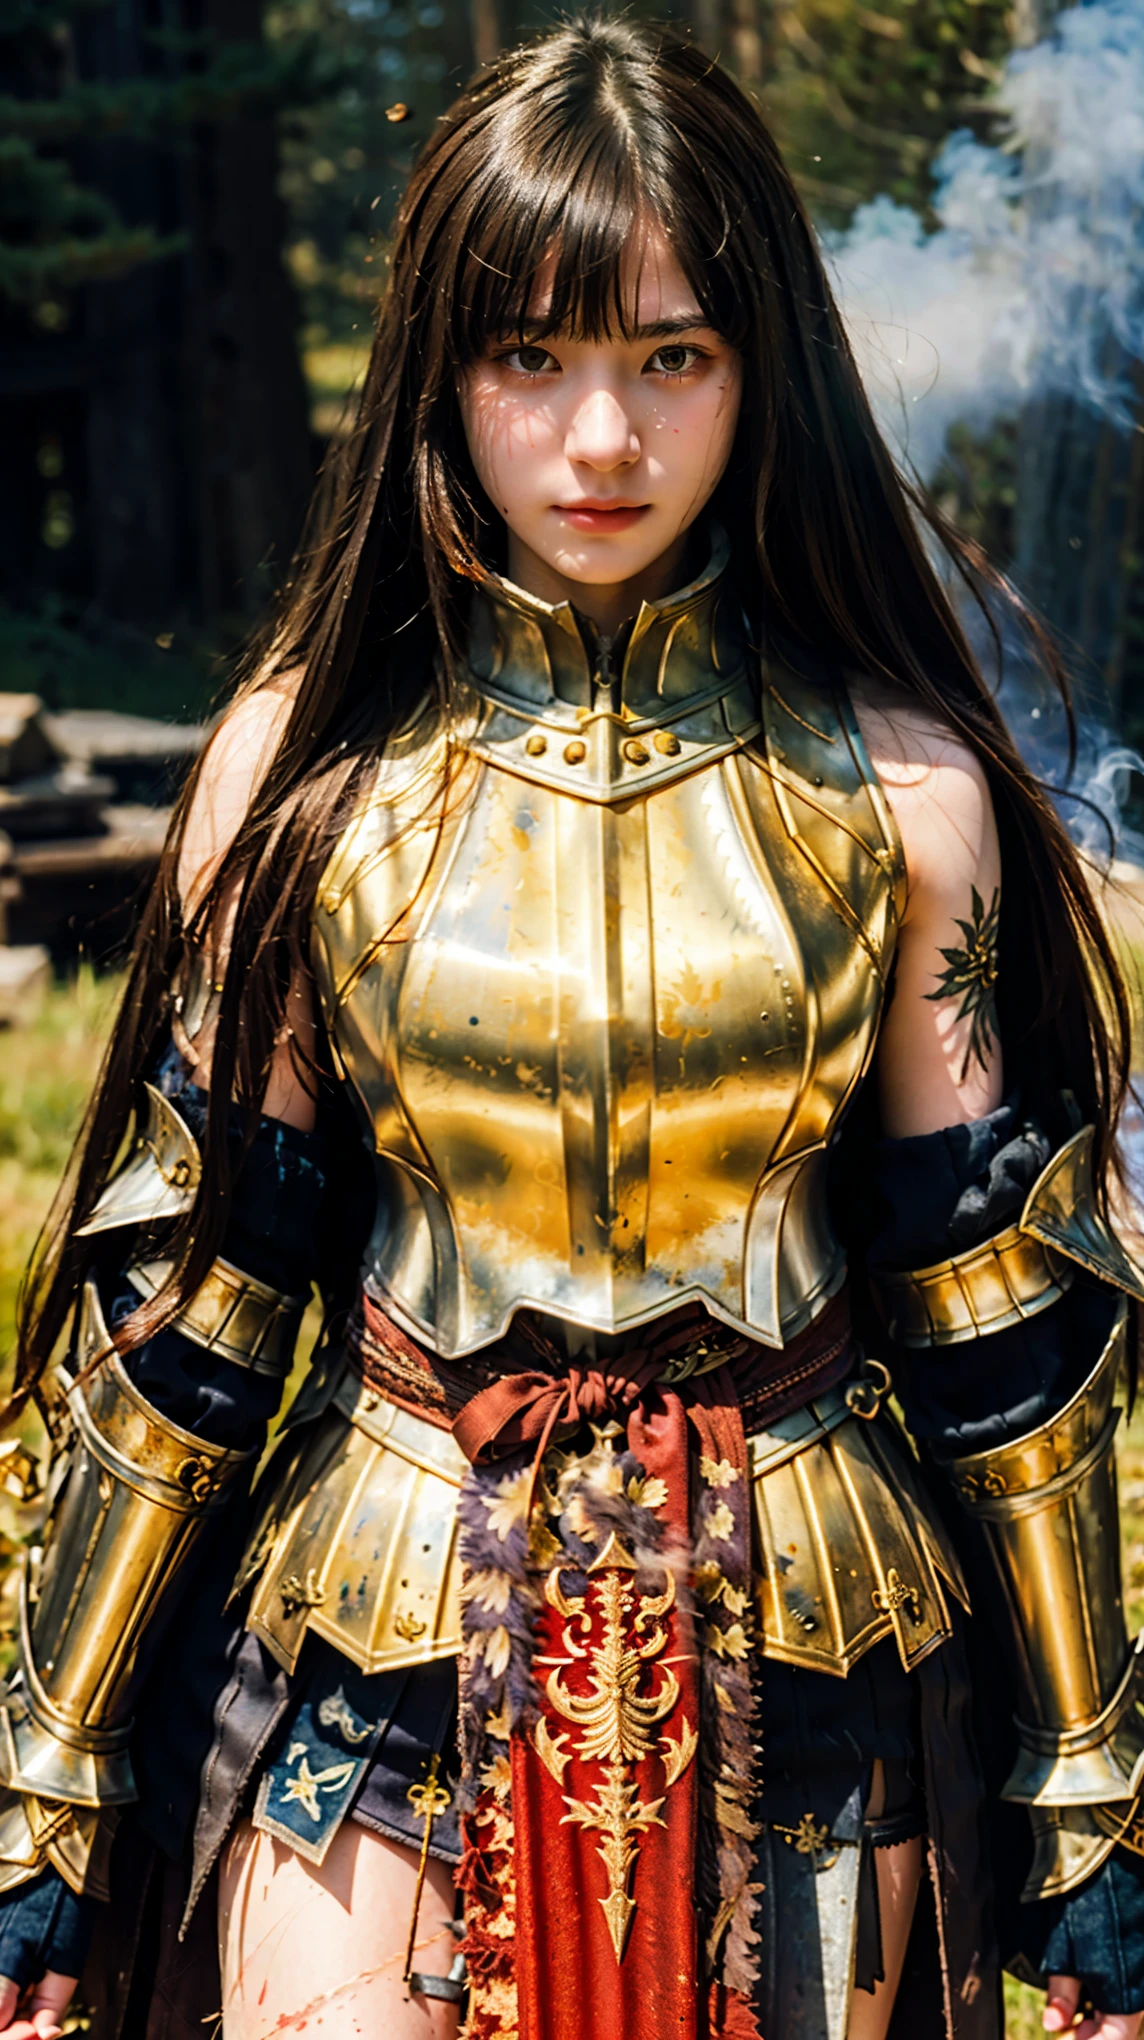 (((Realistic, masterpiece, best quality, crisp detail, high definition, high detail, sharp focus))), ((sleeveless)), 17 years old girl wearing heavy armor, golden armor, japan style armor, full body armor, decorated armor, long straight hair, dirty, sweating, bloodstained face, bloodstained armor, blood scattered, bloodbath, carnage, long bloodstained sword, in epic war, fire and smoke everywhere, death anywhere